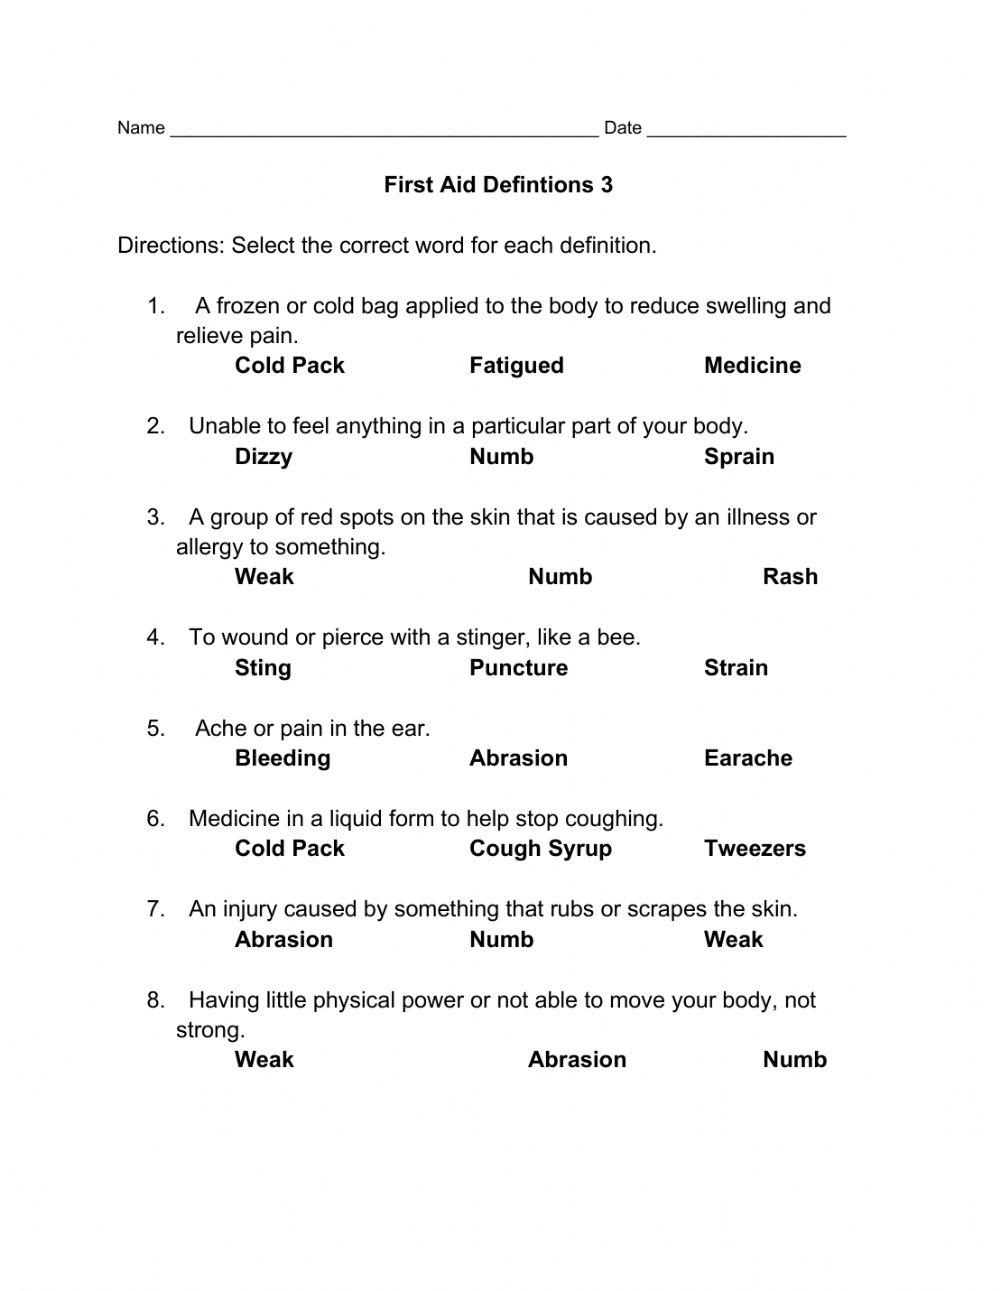 First aid definitions 3